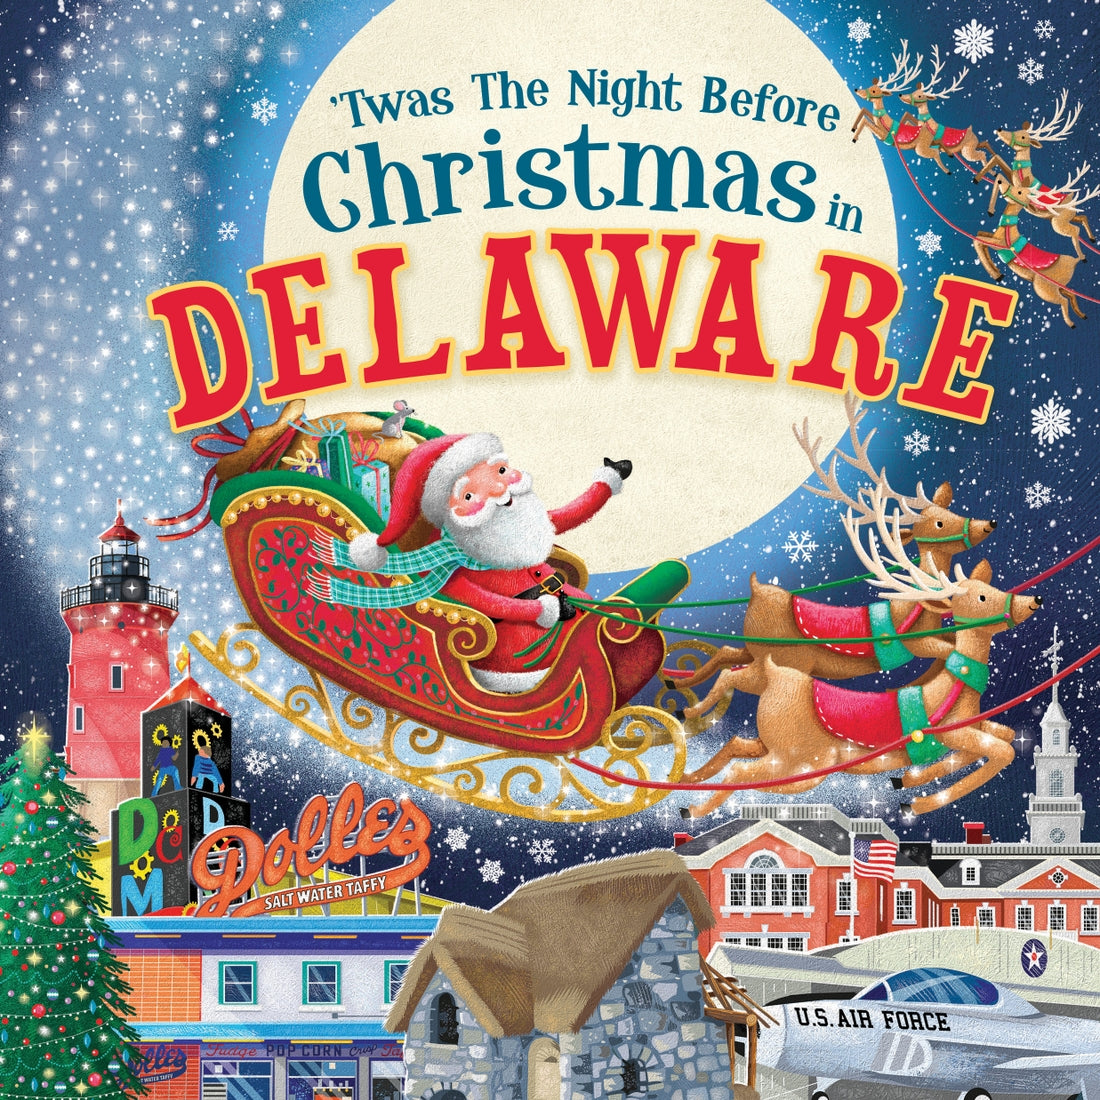 Twas the Night Before Christmas in Delaware